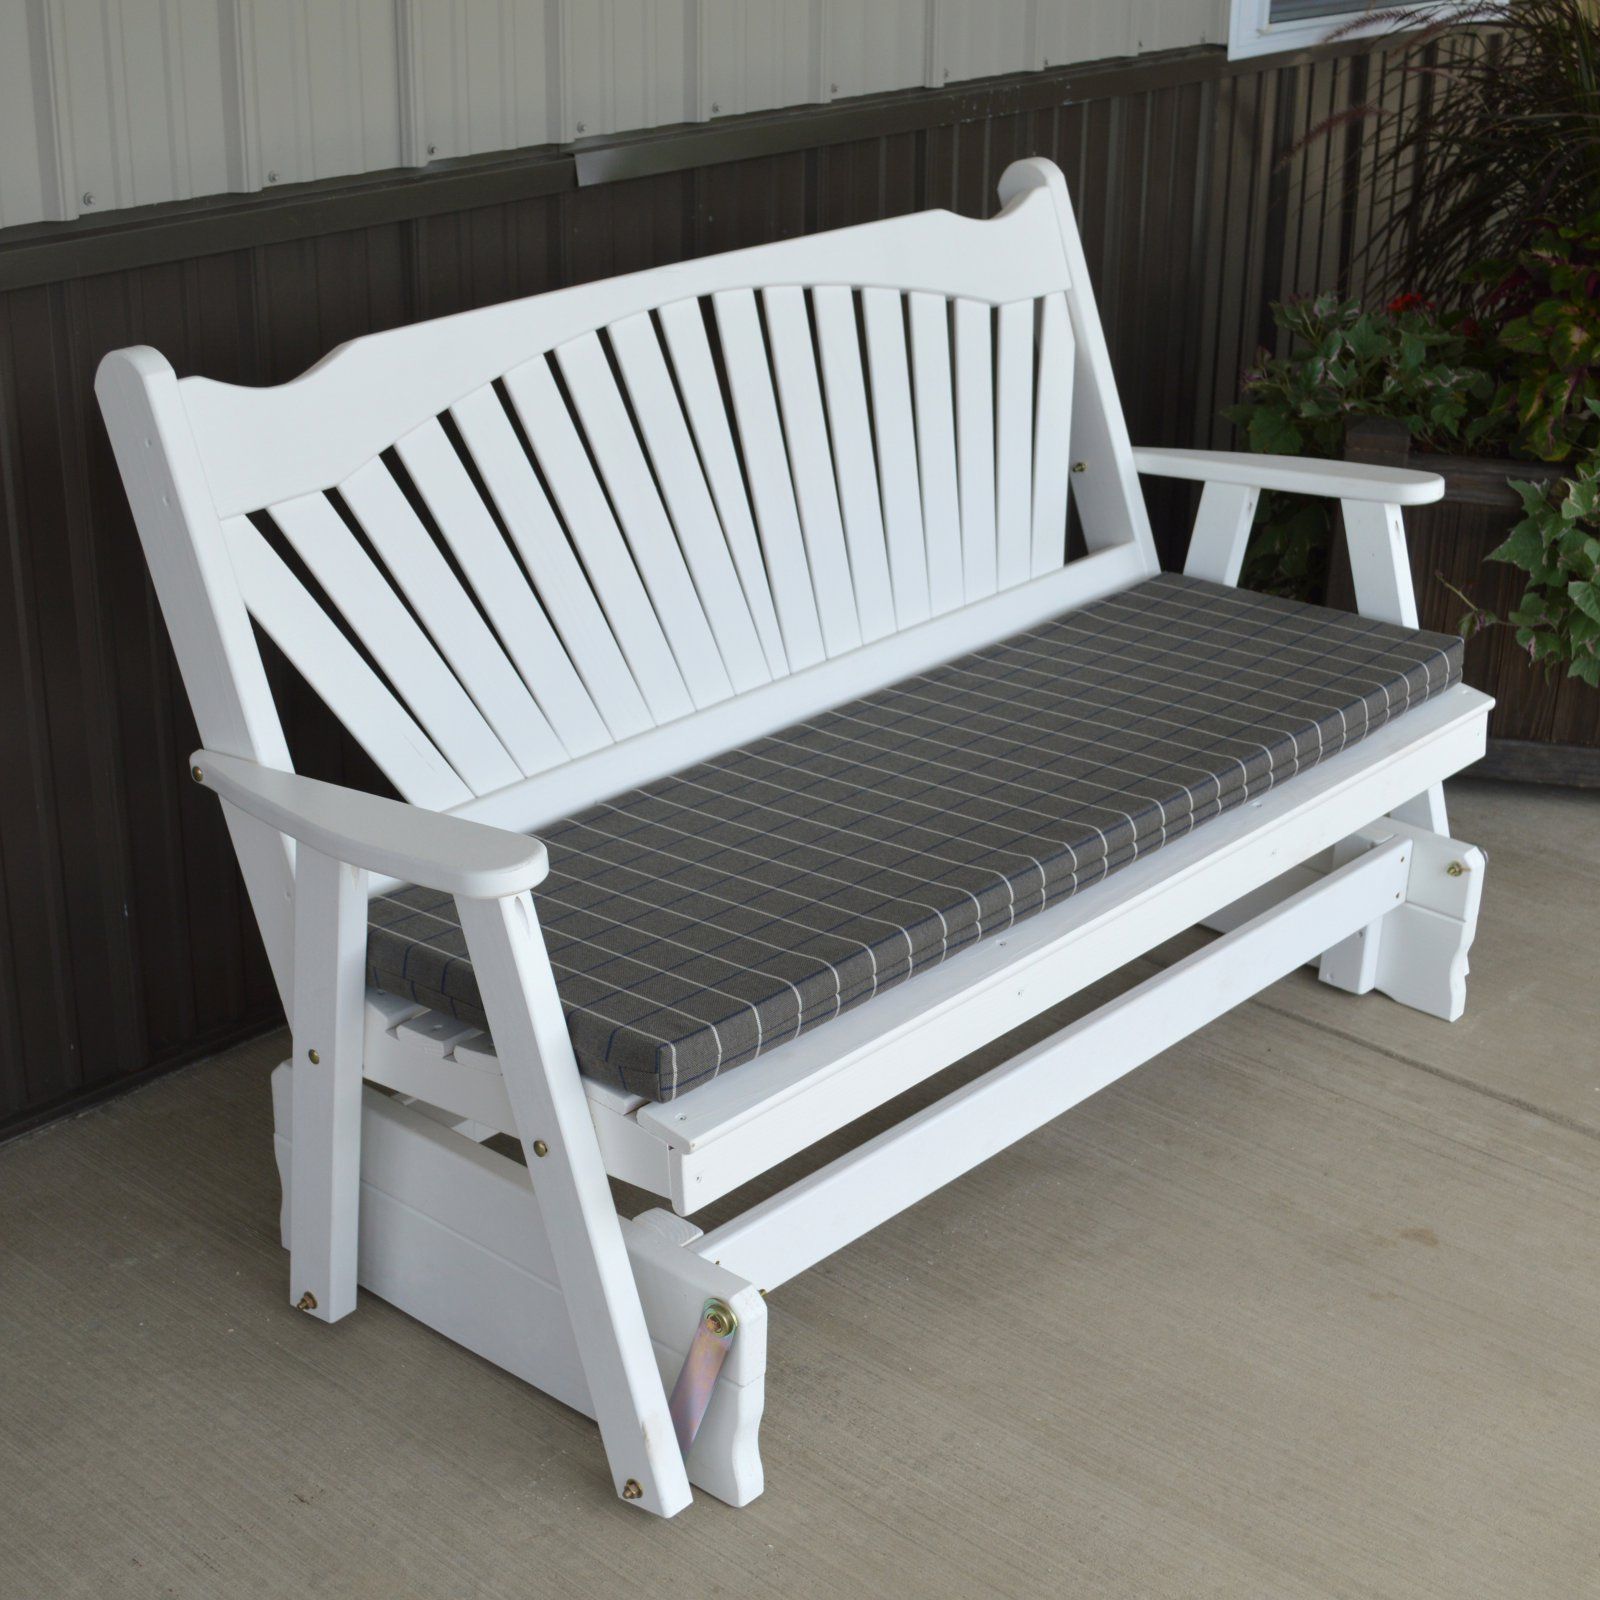 A & L Furniture Yellow Pine Fanback Outdoor Bench Glider Pertaining To Low Back Glider Benches (View 24 of 25)